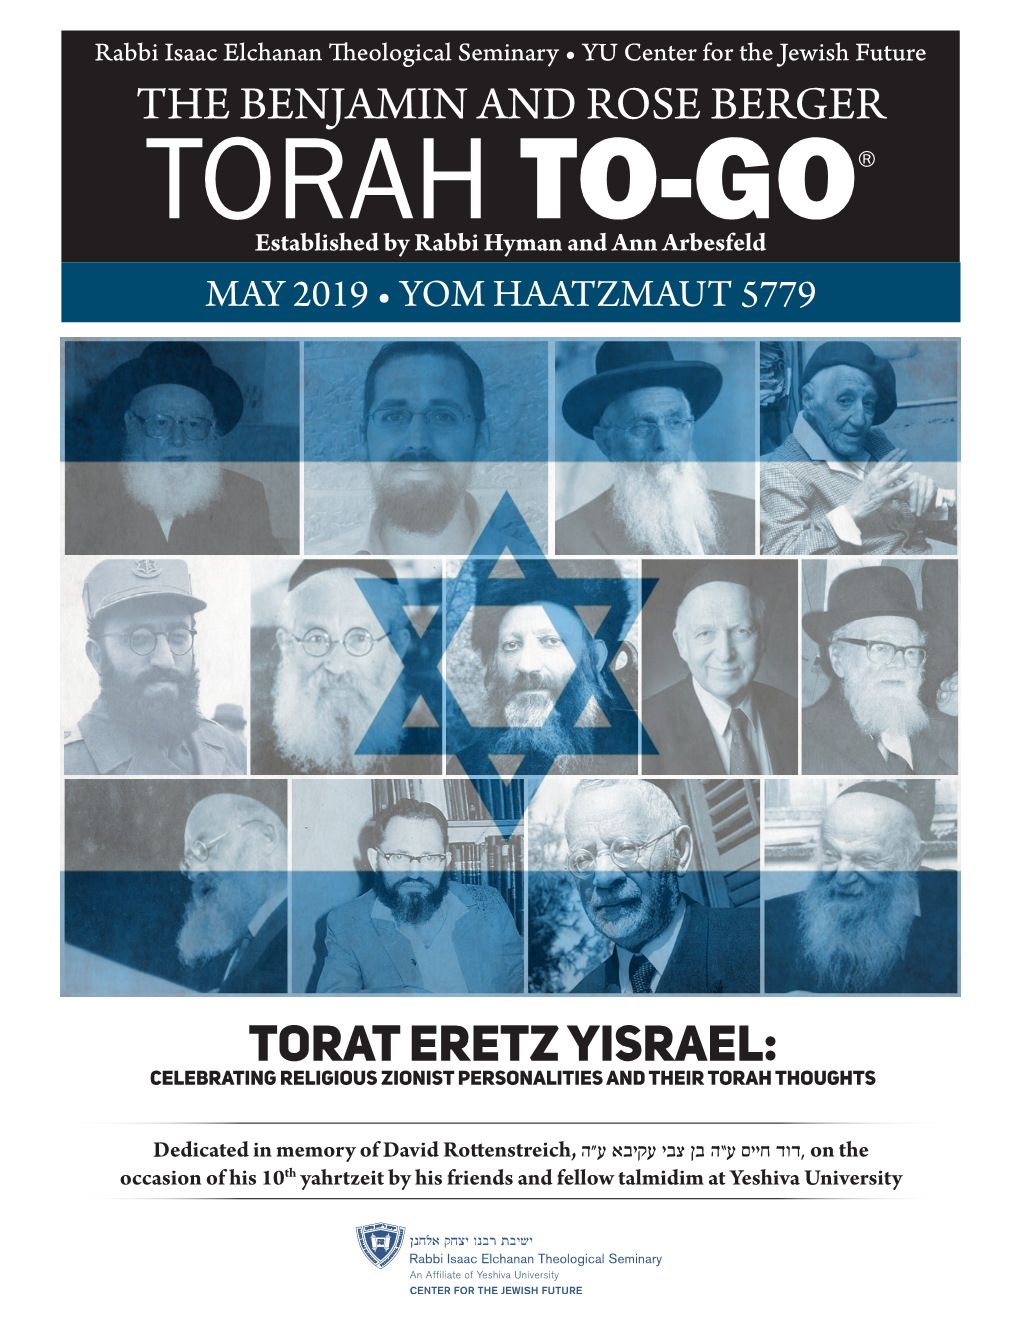 Torat Eretz Yisrael: Celebrating Religious Zionist Personalities and Their Torah Thoughts